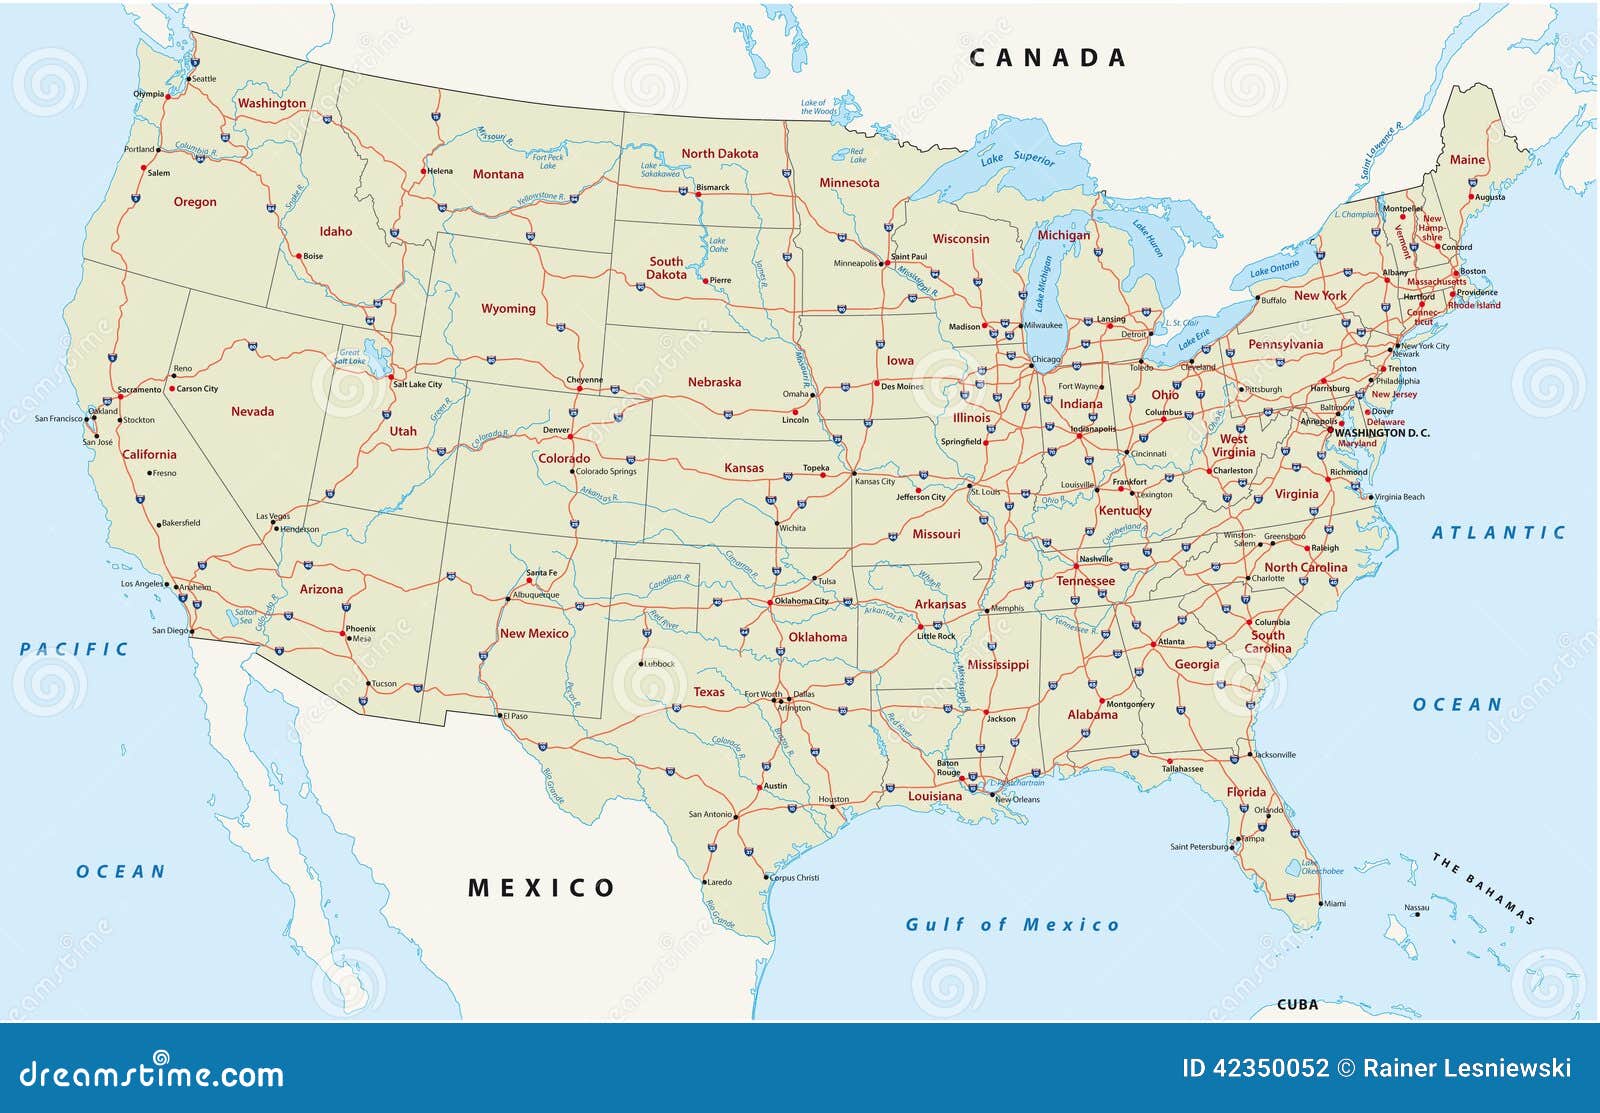 Map Of Major Interstates In The United States - Bank2home.com